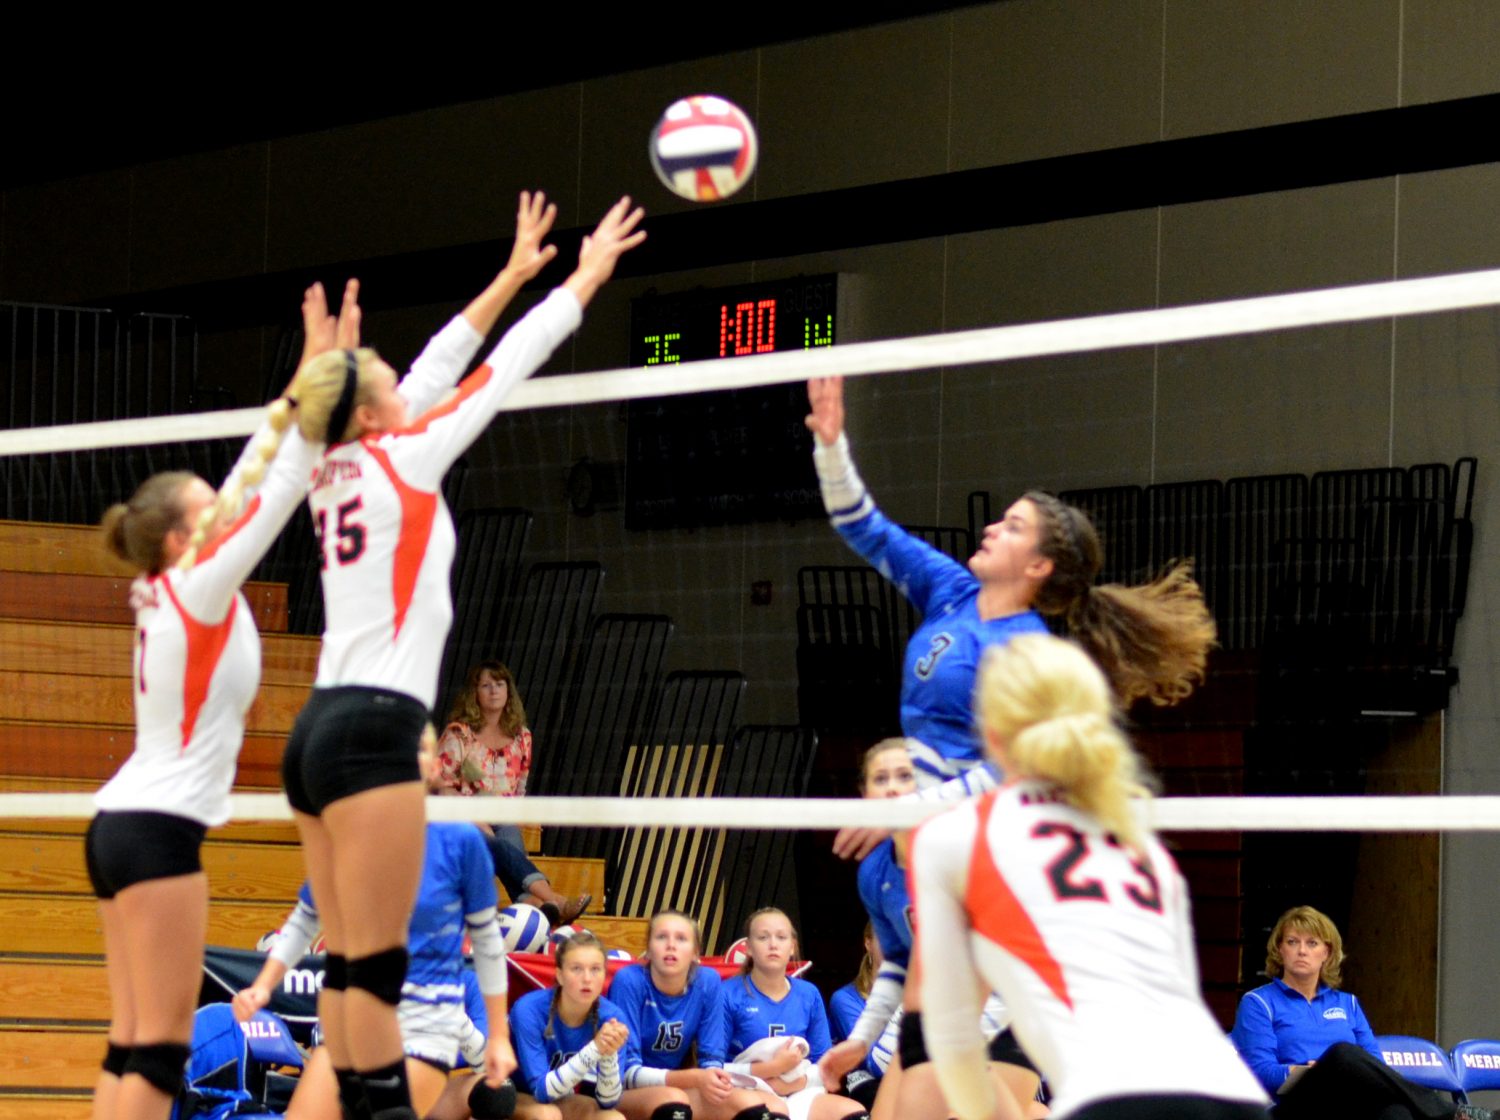 A hard-fought win for Merrill volleyball